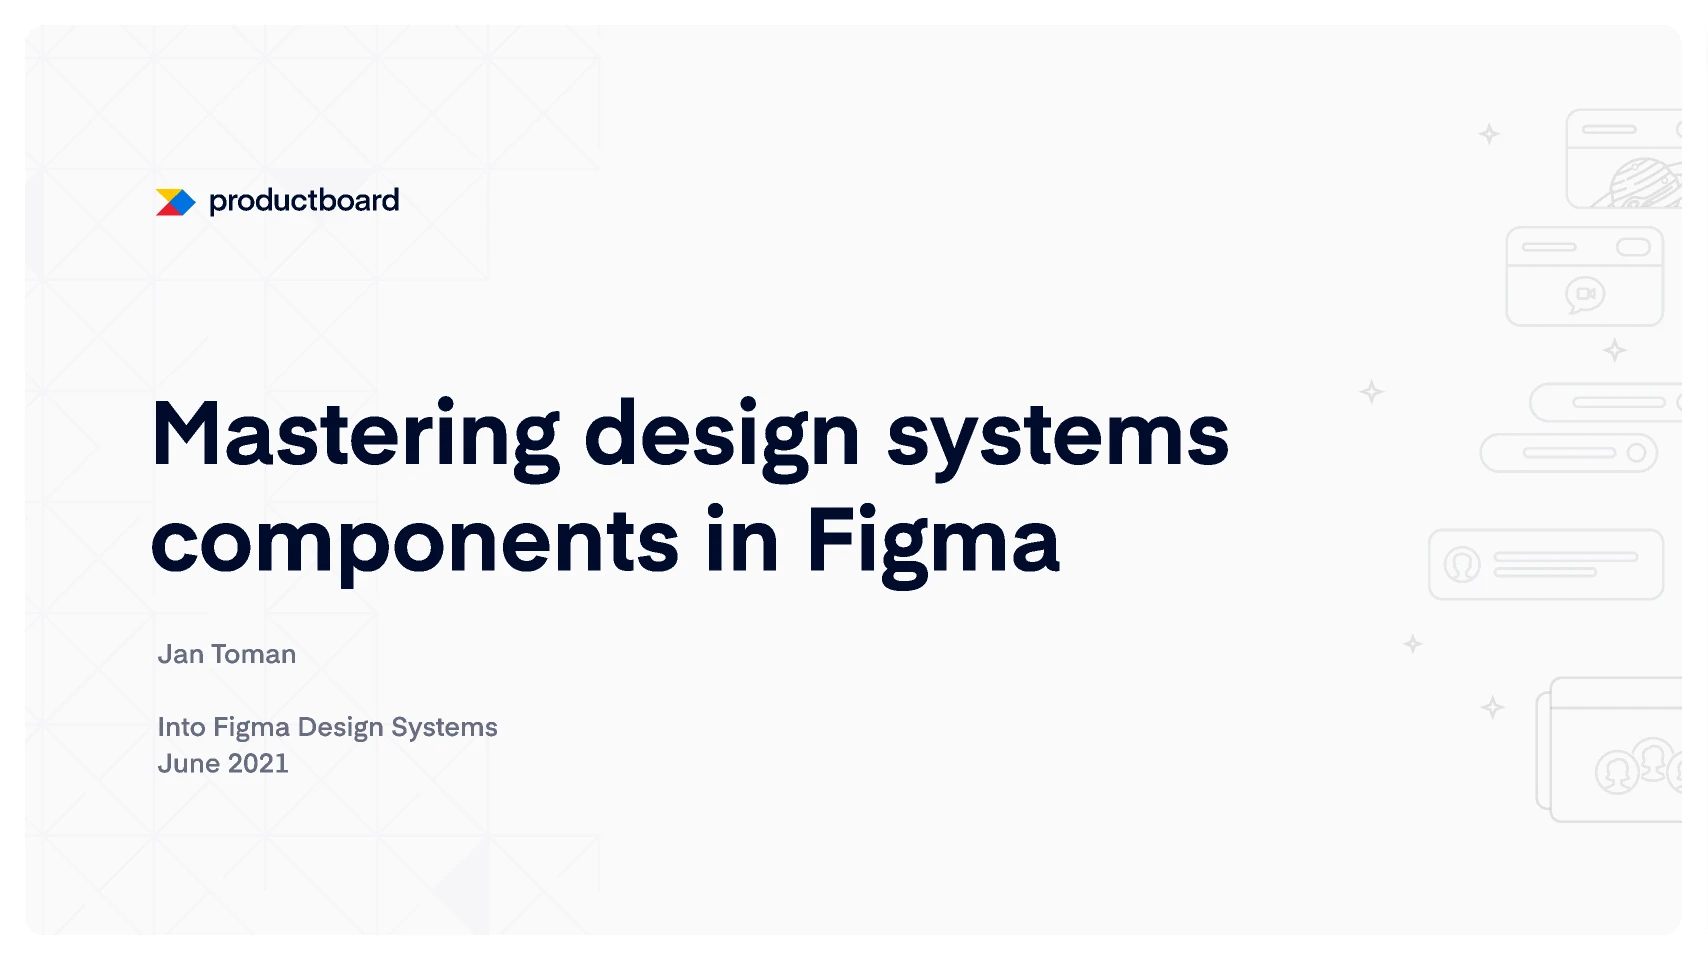 IFDS conf – Mastering design systems in Figma for Figma and Adobe XD